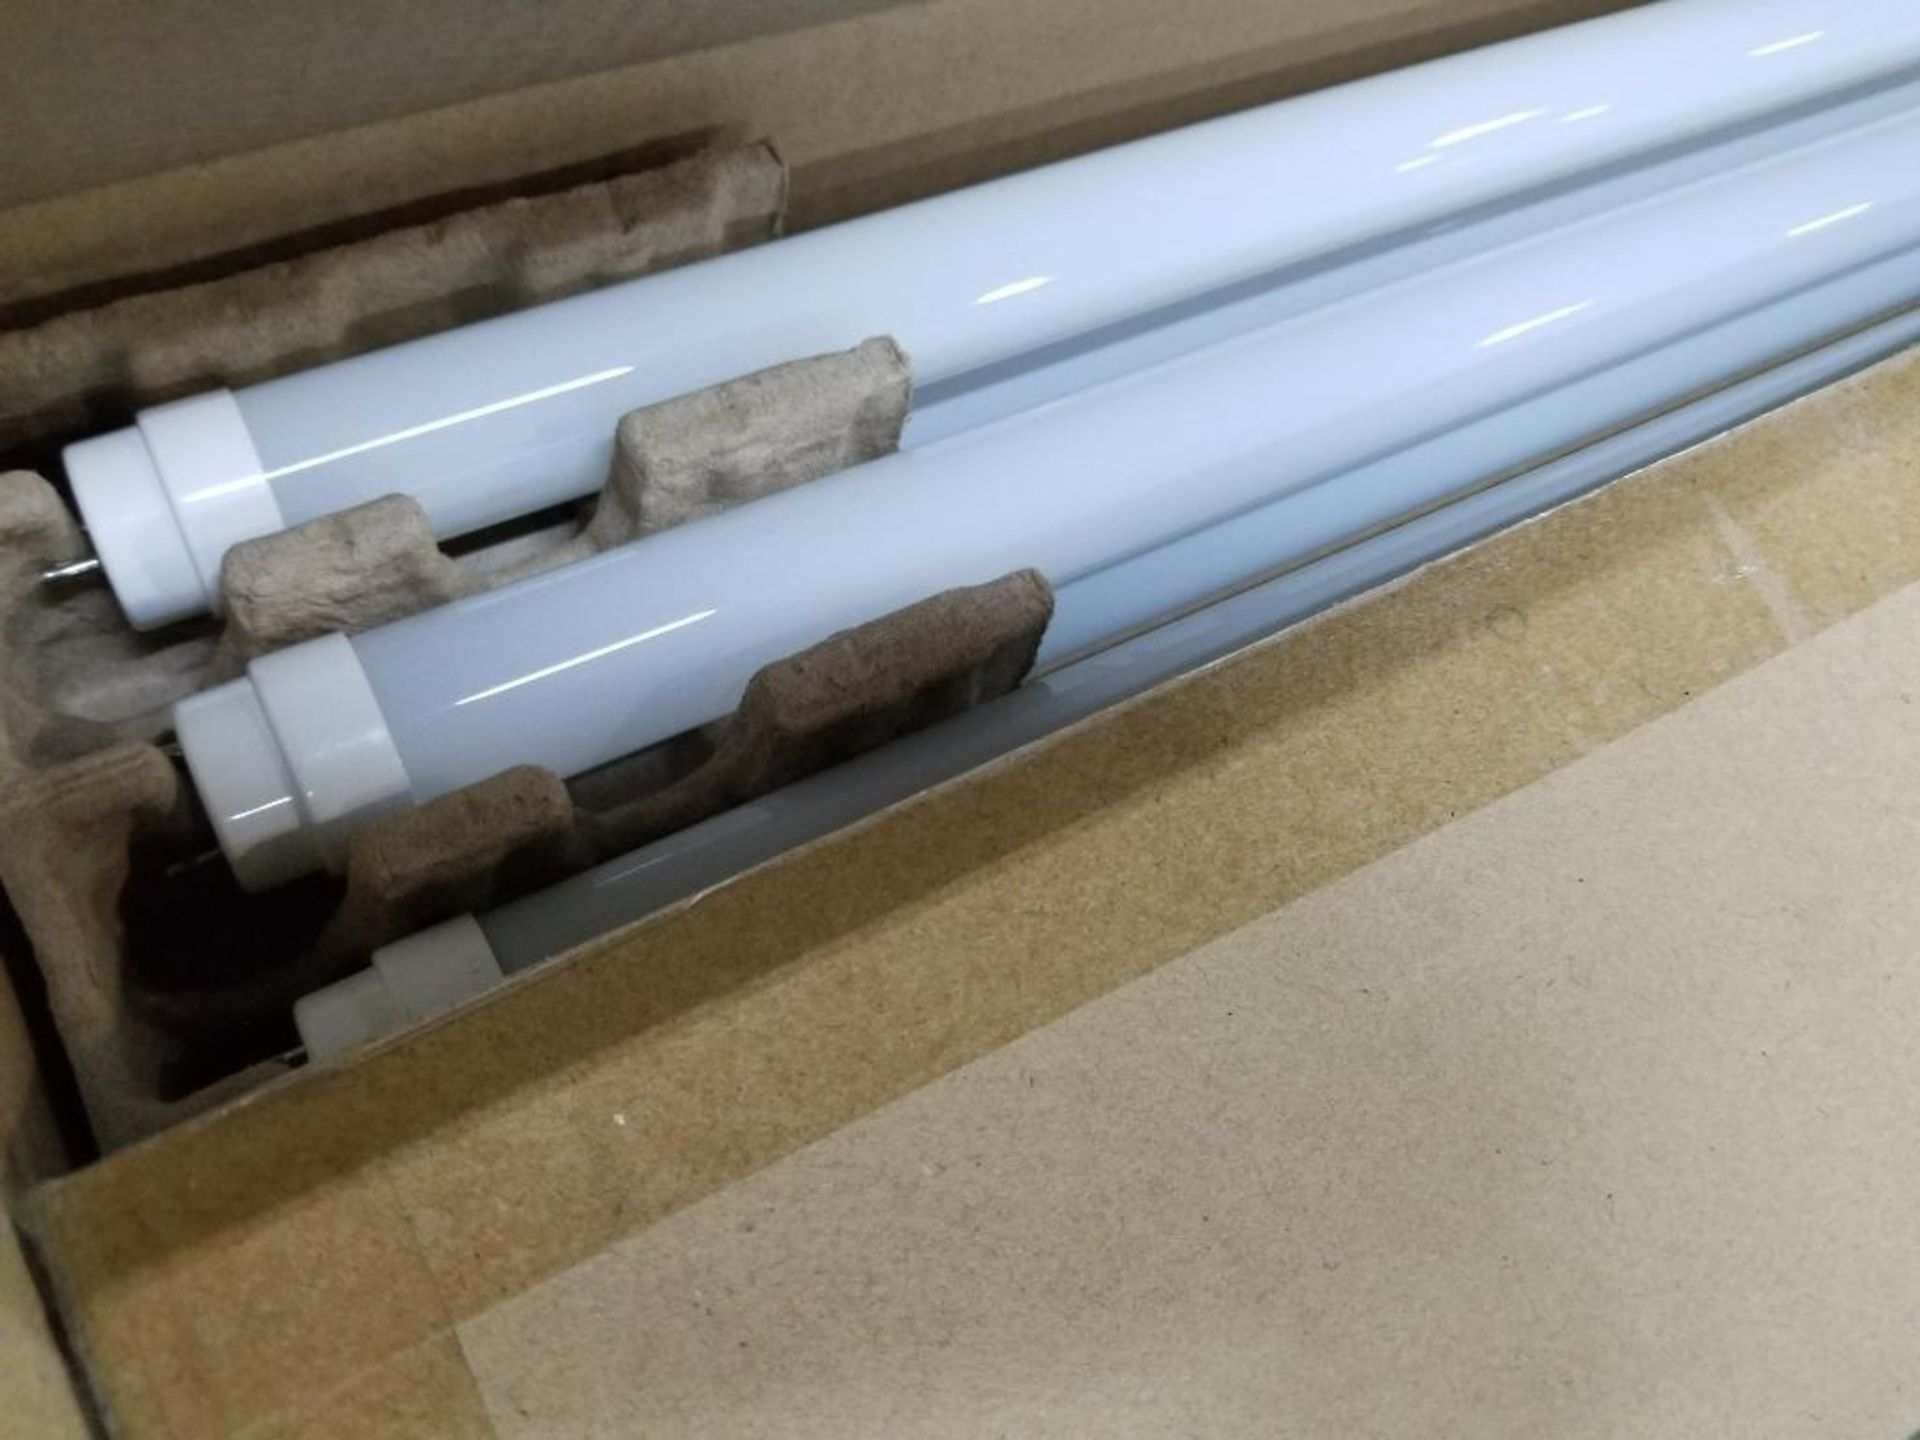 Qty 2 - Boxes of 10 each GE LED T8 replacement bulbs. - Image 4 of 4